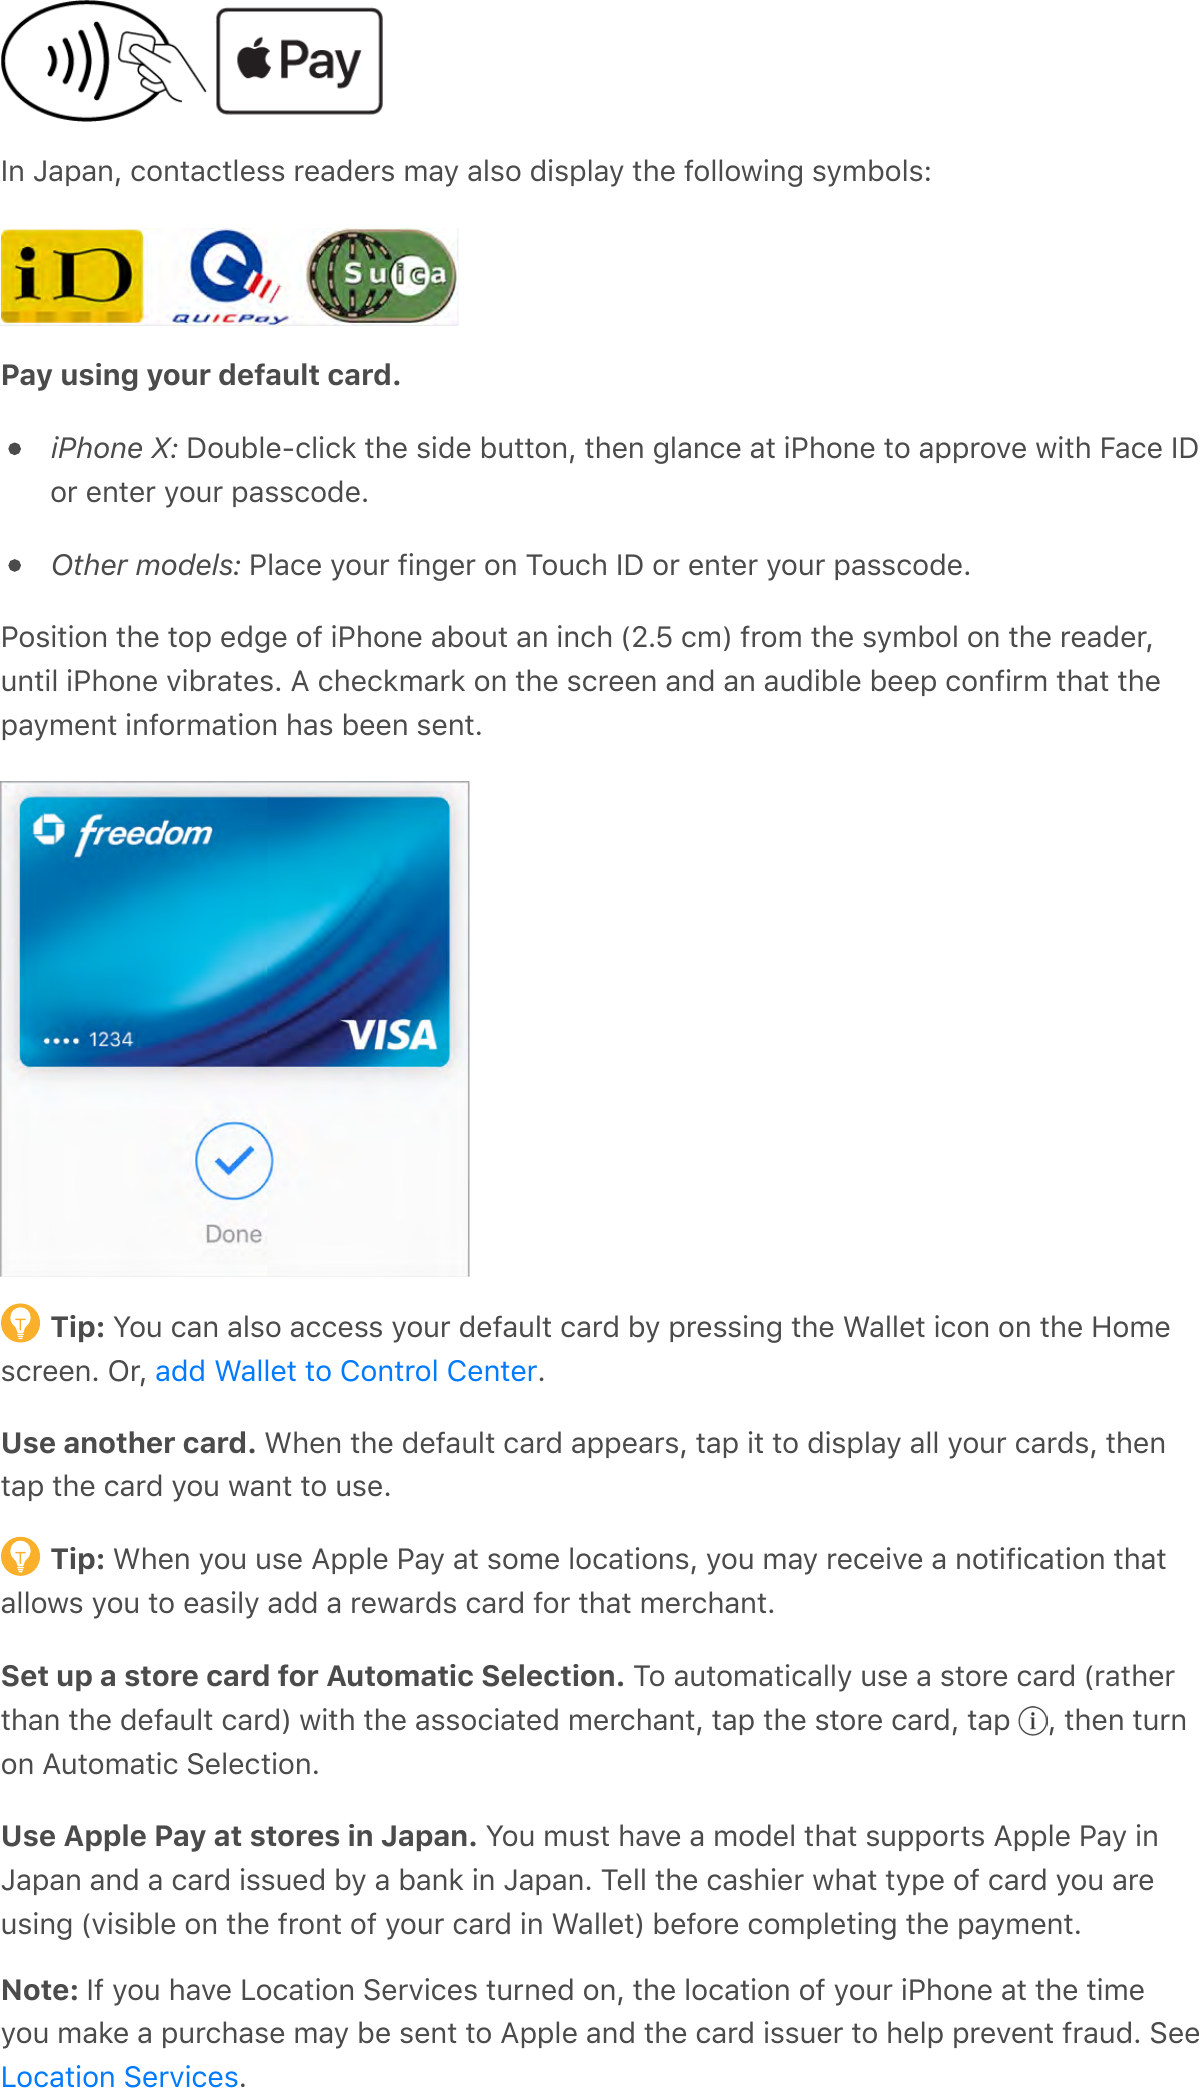 )%&apos;a-;-%Q&apos;/$%*-/*.&amp;,,&apos;0&amp;-C&amp;0,&apos;9-&gt;&apos;-.,$&apos;C!,;.-&gt;&apos;*#&amp;&apos;7$..$3!%4&apos;,&gt;9F$.,RPay using your default card. &apos;iPhone X:&apos;&lt;$6F.&amp;8/.!/2&apos;*#&amp;&apos;,!C&amp;&apos;F6**$%Q&apos;*#&amp;%&apos;4.-%/&amp;&apos;-*&apos;!&quot;#$%&amp;&apos;*$&apos;-;;0$A&amp;&apos;3!*#&apos;5-/&amp;&apos;)&lt;$0&apos;&amp;%*&amp;0&apos;&gt;$60&apos;;-,,/$C&amp;GOther models:&apos;&quot;.-/&amp;&apos;&gt;$60&apos;7!%4&amp;0&apos;$%&apos;?$6/#&apos;)&lt;&apos;$0&apos;&amp;%*&amp;0&apos;&gt;$60&apos;;-,,/$C&amp;G&quot;$,!*!$%&apos;*#&amp;&apos;*$;&apos;&amp;C4&amp;&apos;$7&apos;!&quot;#$%&amp;&apos;-F$6*&apos;-%&apos;!%/#&apos;\kGY&apos;/9]&apos;70$9&apos;*#&amp;&apos;,&gt;9F$.&apos;$%&apos;*#&amp;&apos;0&amp;-C&amp;0Q6%*!.&apos;!&quot;#$%&amp;&apos;A!F0-*&amp;,G&apos;B&apos;/#&amp;/29-02&apos;$%&apos;*#&amp;&apos;,/0&amp;&amp;%&apos;-%C&apos;-%&apos;-6C!F.&amp;&apos;F&amp;&amp;;&apos;/$%7!09&apos;*#-*&apos;*#&amp;;-&gt;9&amp;%*&apos;!%7$09-*!$%&apos;#-,&apos;F&amp;&amp;%&apos;,&amp;%*GTip: S$6&apos;/-%&apos;-.,$&apos;-//&amp;,,&apos;&gt;$60&apos;C&amp;7-6.*&apos;/-0C&apos;F&gt;&apos;;0&amp;,,!%4&apos;*#&amp;&apos;L-..&amp;*&apos;!/$%&apos;$%&apos;*#&amp;&apos;`$9&amp;,/0&amp;&amp;%G&apos;N0Q&apos; GUse another card. L#&amp;%&apos;*#&amp;&apos;C&amp;7-6.*&apos;/-0C&apos;-;;&amp;-0,Q&apos;*-;&apos;!*&apos;*$&apos;C!,;.-&gt;&apos;-..&apos;&gt;$60&apos;/-0C,Q&apos;*#&amp;%*-;&apos;*#&amp;&apos;/-0C&apos;&gt;$6&apos;3-%*&apos;*$&apos;6,&amp;GTip: L#&amp;%&apos;&gt;$6&apos;6,&amp;&apos;B;;.&amp;&apos;&quot;-&gt;&apos;-*&apos;,$9&amp;&apos;.$/-*!$%,Q&apos;&gt;$6&apos;9-&gt;&apos;0&amp;/&amp;!A&amp;&apos;-&apos;%$*!7!/-*!$%&apos;*#-*-..$3,&apos;&gt;$6&apos;*$&apos;&amp;-,!.&gt;&apos;-CC&apos;-&apos;0&amp;3-0C,&apos;/-0C&apos;7$0&apos;*#-*&apos;9&amp;0/#-%*GSet up a store card for Automatic Selection. ?$&apos;-6*$9-*!/-..&gt;&apos;6,&amp;&apos;-&apos;,*$0&amp;&apos;/-0C&apos;\0-*#&amp;0*#-%&apos;*#&amp;&apos;C&amp;7-6.*&apos;/-0C]&apos;3!*#&apos;*#&amp;&apos;-,,$/!-*&amp;C&apos;9&amp;0/#-%*Q&apos;*-;&apos;*#&amp;&apos;,*$0&amp;&apos;/-0CQ&apos;*-;&apos; Q&apos;*#&amp;%&apos;*60%$%&apos;B6*$9-*!/&apos;:&amp;.&amp;/*!$%GUse Apple Pay at stores in Japan. S$6&apos;96,*&apos;#-A&amp;&apos;-&apos;9$C&amp;.&apos;*#-*&apos;,6;;$0*,&apos;B;;.&amp;&apos;&quot;-&gt;&apos;!%a-;-%&apos;-%C&apos;-&apos;/-0C&apos;!,,6&amp;C&apos;F&gt;&apos;-&apos;F-%2&apos;!%&apos;a-;-%G&apos;?&amp;..&apos;*#&amp;&apos;/-,#!&amp;0&apos;3#-*&apos;*&gt;;&amp;&apos;$7&apos;/-0C&apos;&gt;$6&apos;-0&amp;6,!%4&apos;\A!,!F.&amp;&apos;$%&apos;*#&amp;&apos;70$%*&apos;$7&apos;&gt;$60&apos;/-0C&apos;!%&apos;L-..&amp;*]&apos;F&amp;7$0&amp;&apos;/$9;.&amp;*!%4&apos;*#&amp;&apos;;-&gt;9&amp;%*GNote: )7&apos;&gt;$6&apos;#-A&amp;&apos;D$/-*!$%&apos;:&amp;0A!/&amp;,&apos;*60%&amp;C&apos;$%Q&apos;*#&amp;&apos;.$/-*!$%&apos;$7&apos;&gt;$60&apos;!&quot;#$%&amp;&apos;-*&apos;*#&amp;&apos;*!9&amp;&gt;$6&apos;9-2&amp;&apos;-&apos;;60/#-,&amp;&apos;9-&gt;&apos;F&amp;&apos;,&amp;%*&apos;*$&apos;B;;.&amp;&apos;-%C&apos;*#&amp;&apos;/-0C&apos;!,,6&amp;0&apos;*$&apos;#&amp;.;&apos;;0&amp;A&amp;%*&apos;70-6CG&apos;:&amp;&amp;G-CC&apos;L-..&amp;*&apos;*$&apos;T$%*0$.&apos;T&amp;%*&amp;0D$/-*!$%&apos;:&amp;0A!/&amp;,